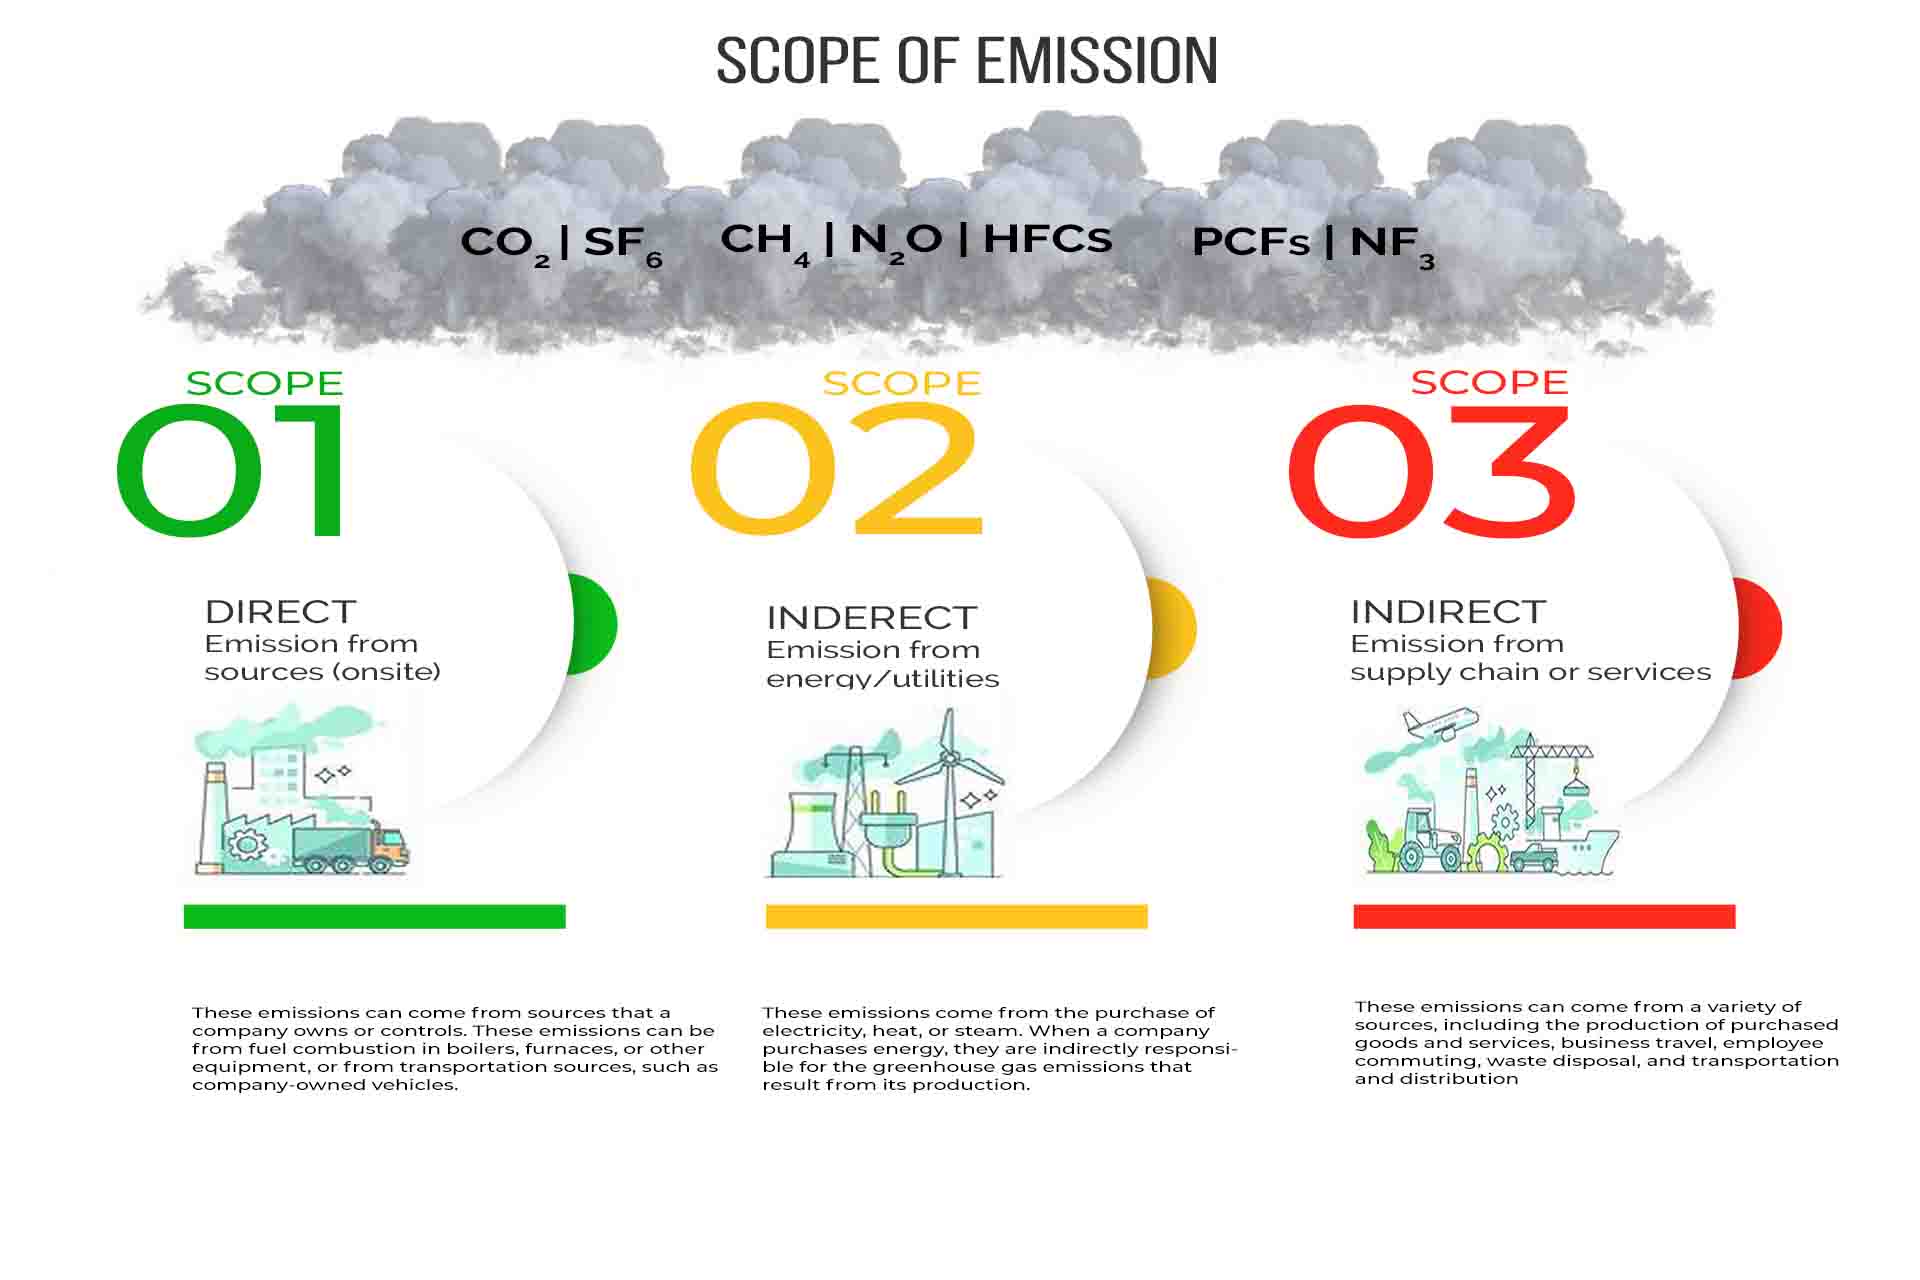 What are scope 1, 2 and 3 carbon emissions?